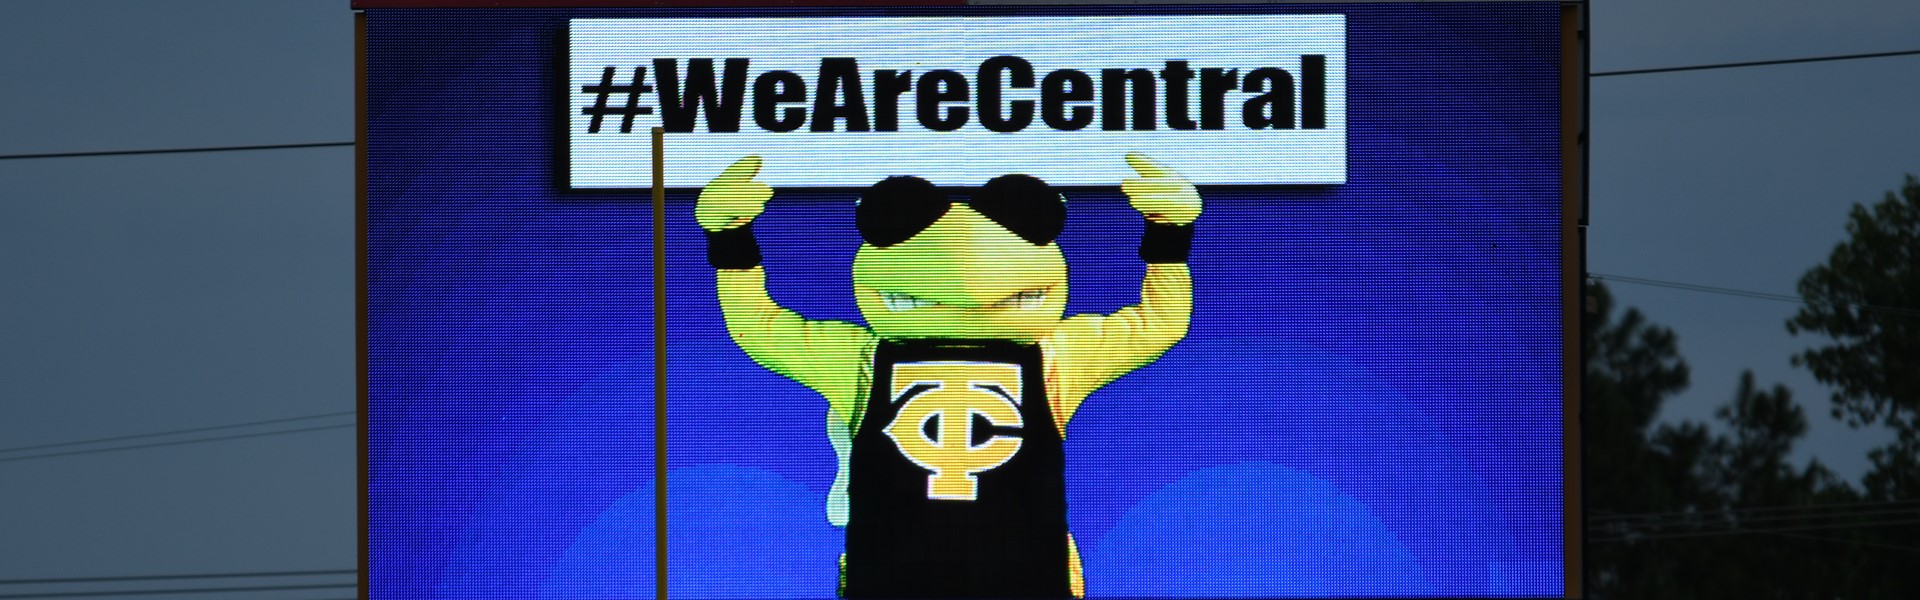 We are Central